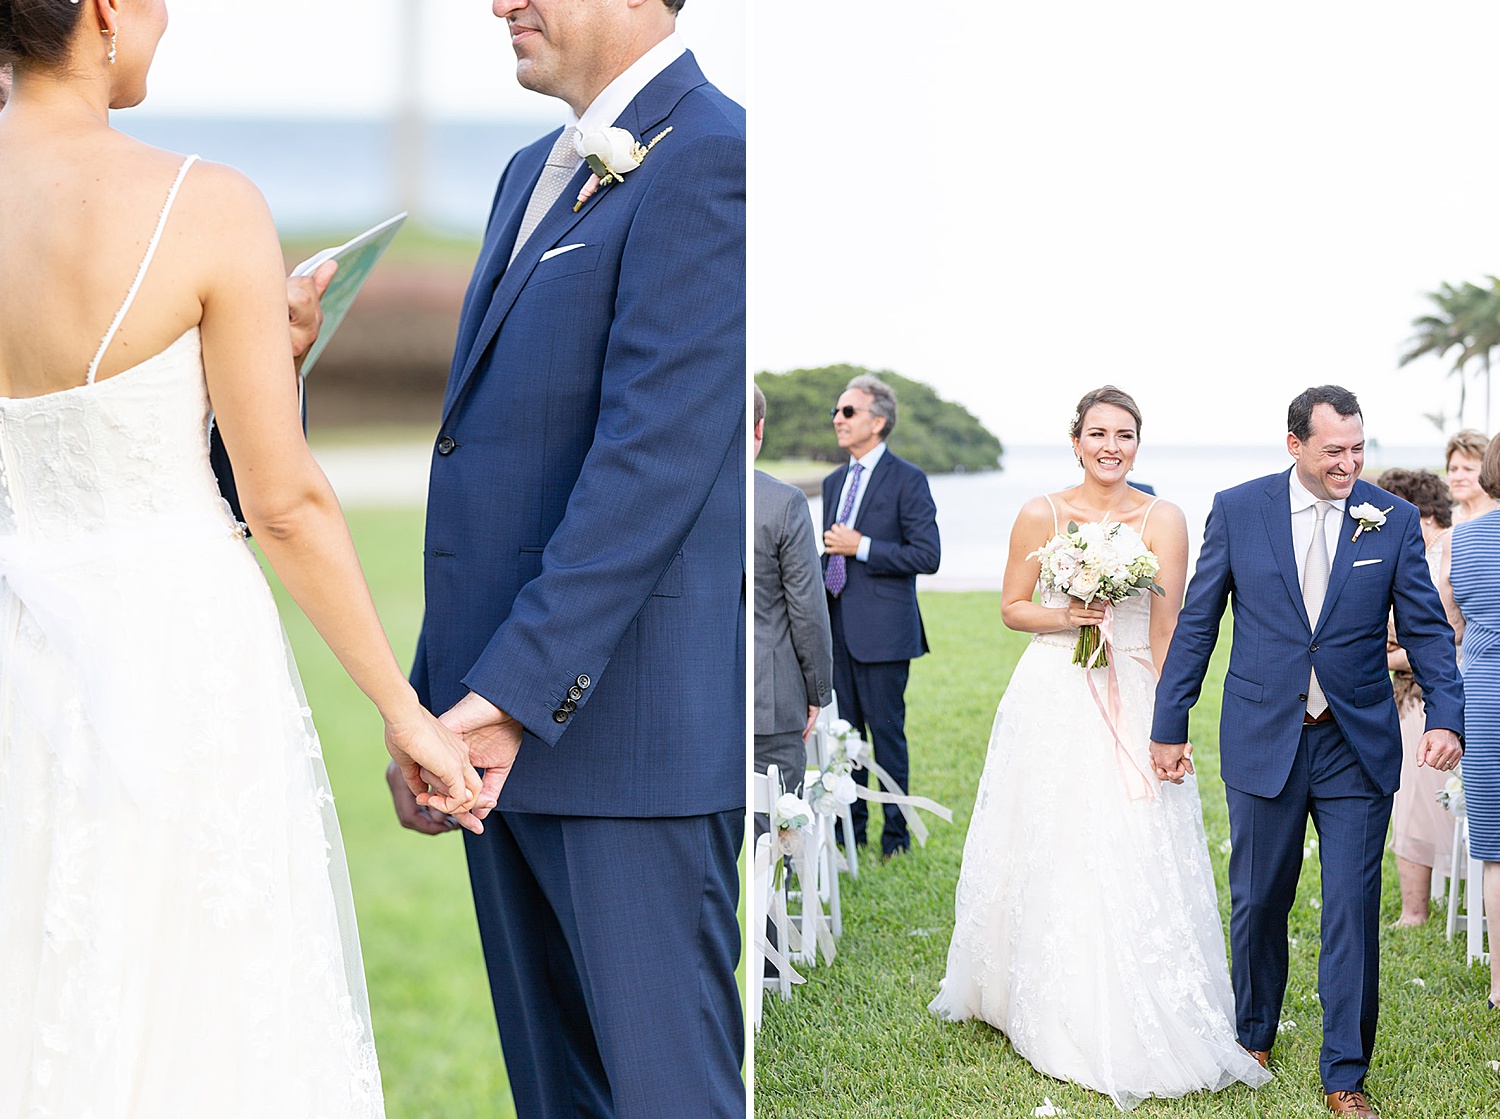 Two photos of an outdoor wedding ceremony to illustrate how many hours of wedding photography you need